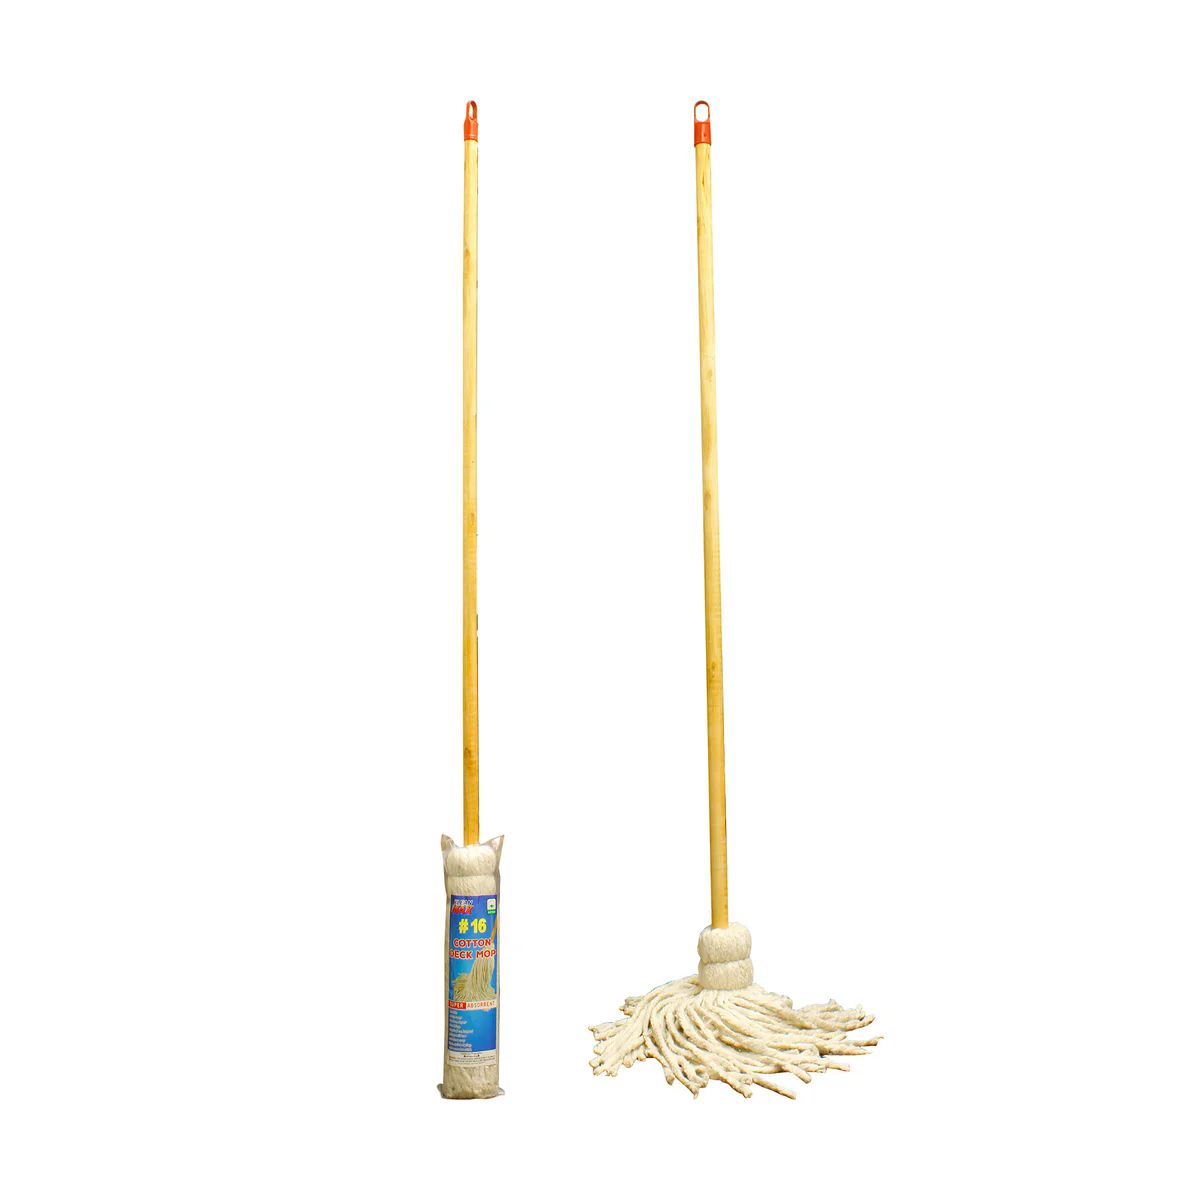 12 Pieces of Mop With Wood Handle Cotton